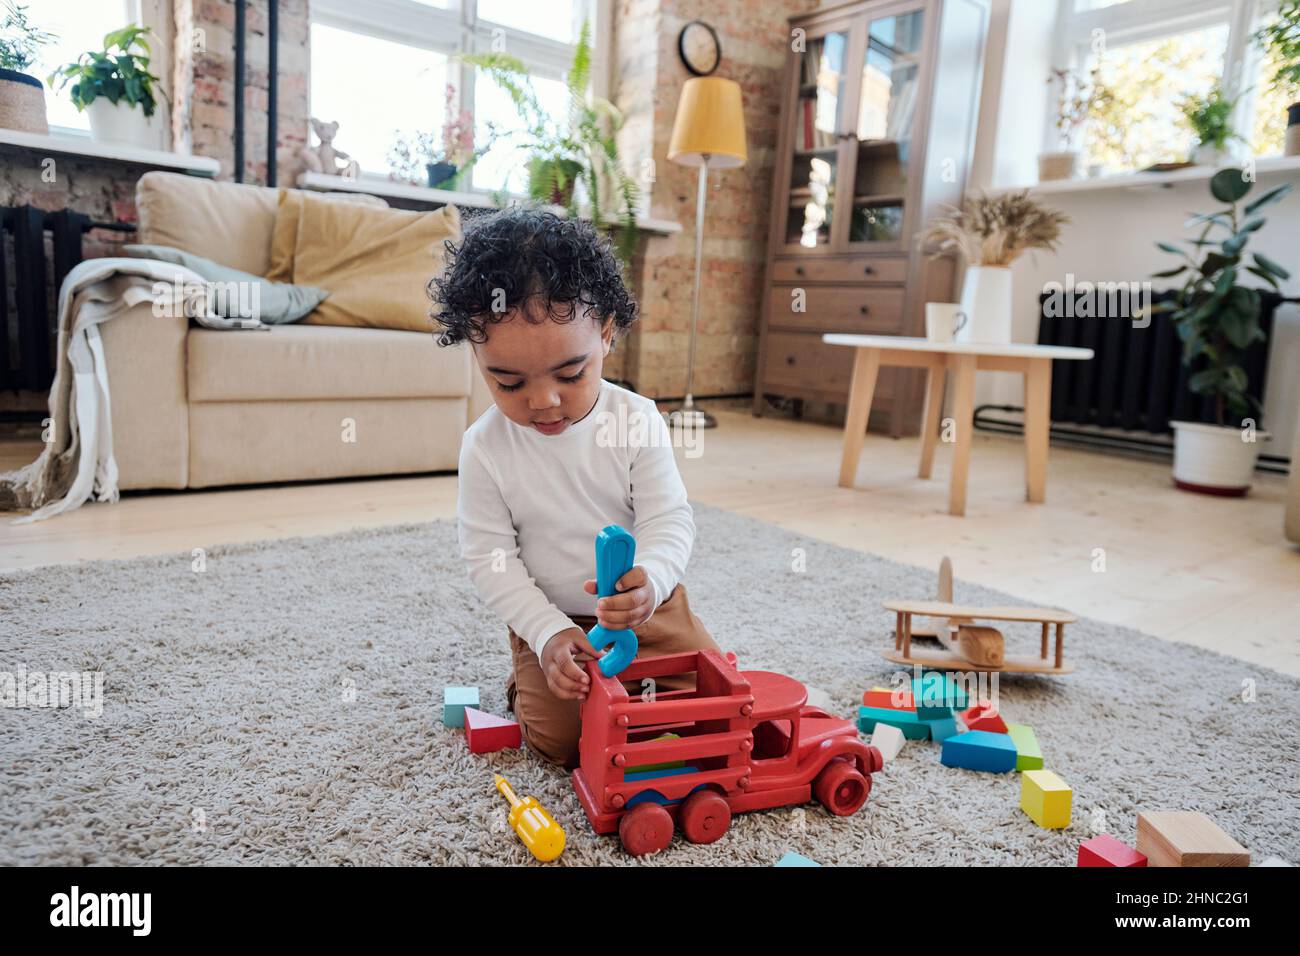 Serious little boy with curly hair sitting on carpet and playing car mechanic at home Stock Photo